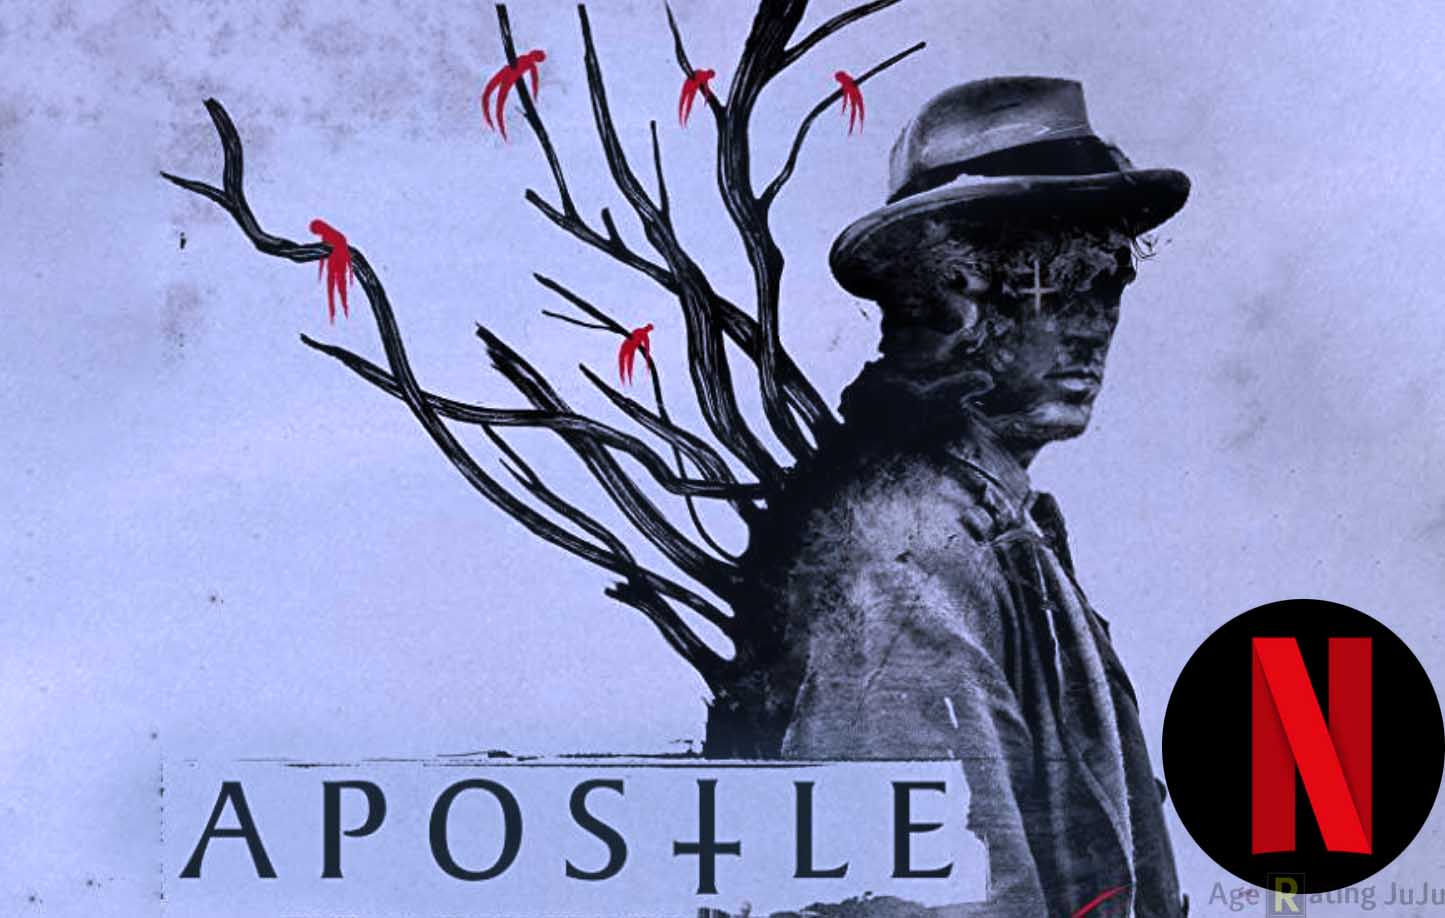 Apostle Age Rating 2018 - Netflix Movie Poster Images and Wallpapers